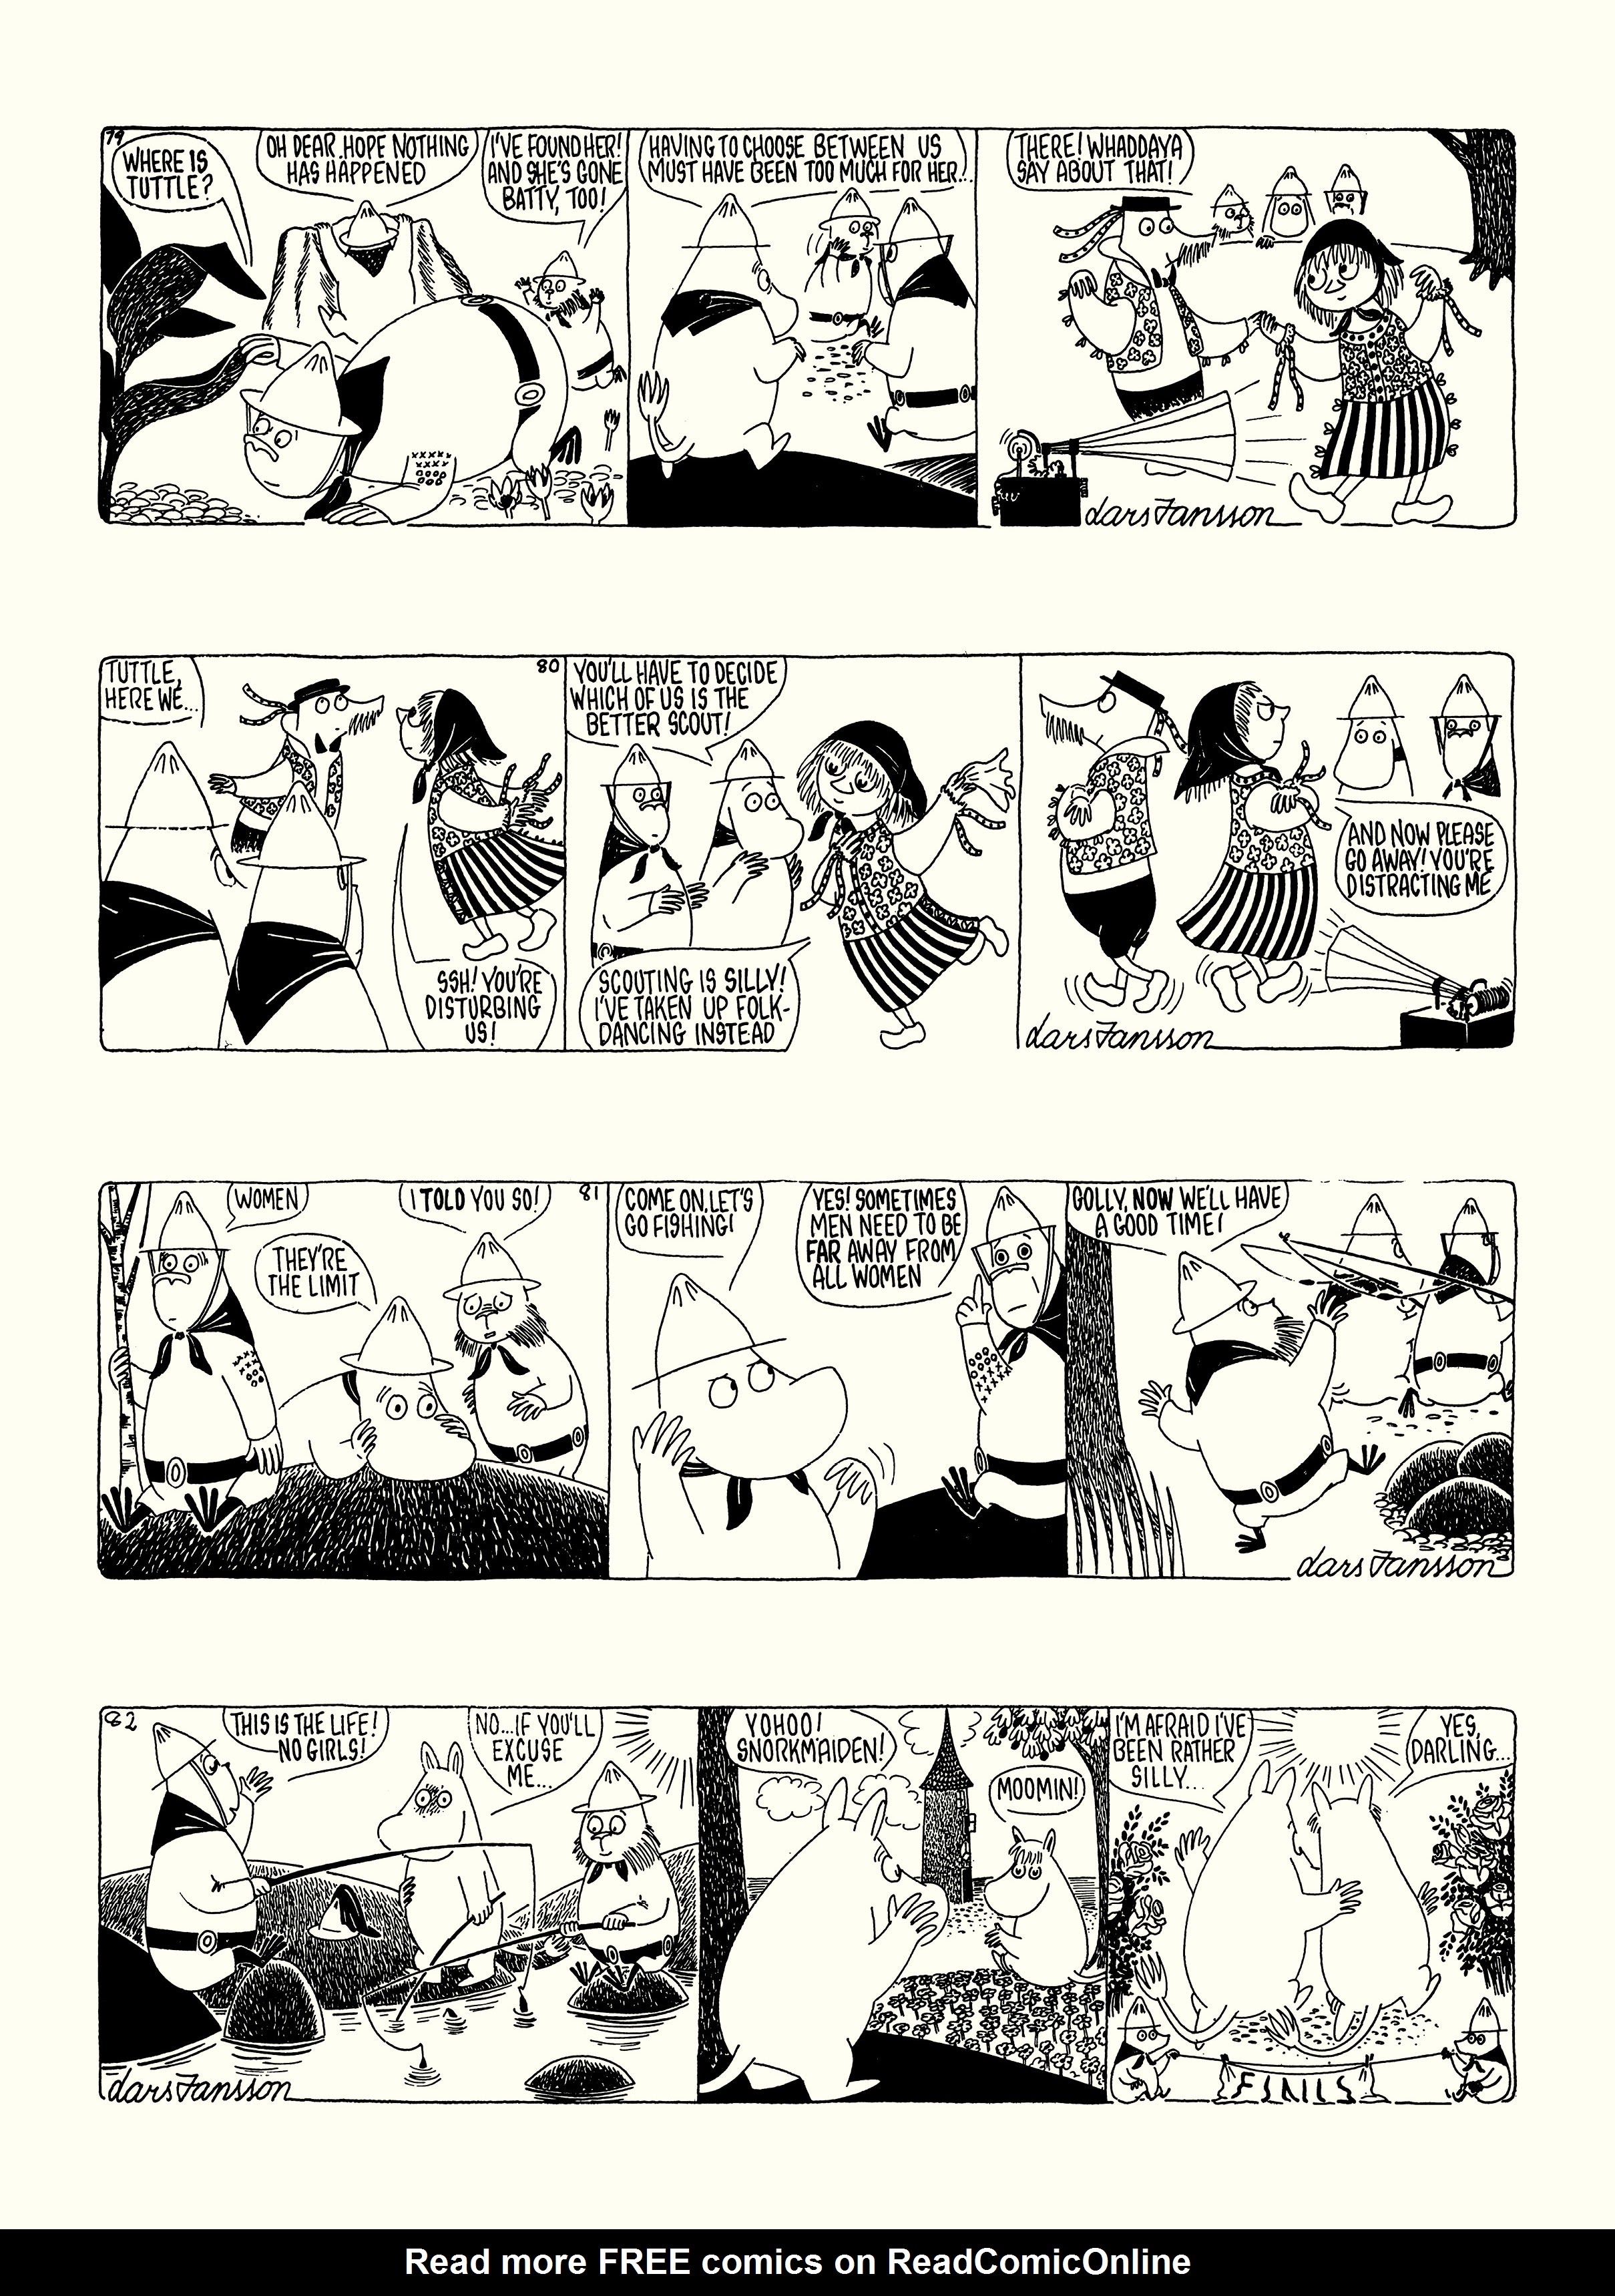 Read online Moomin: The Complete Lars Jansson Comic Strip comic -  Issue # TPB 7 - 47